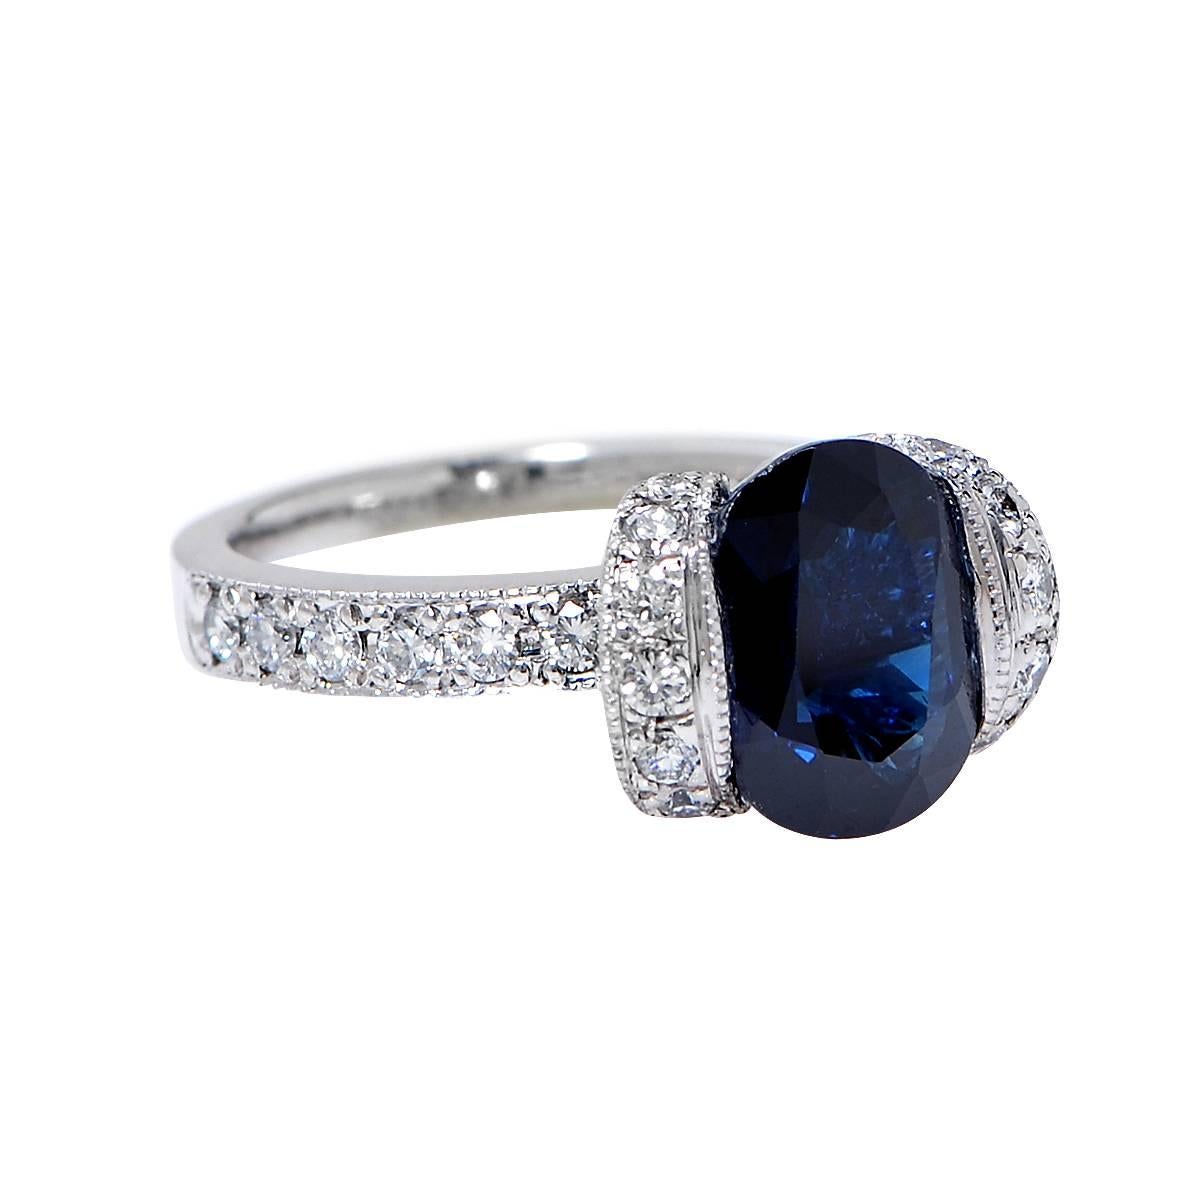 Spectacular Vivid Diamonds ring crafted in Platinum, showcasing a GIA Certified dark blue oval cut Sapphire weighing 2.71 carats accented by brilliant cut diamonds weighing approximately .45 carats total, G Color, VS Clarity.

Our pieces are all